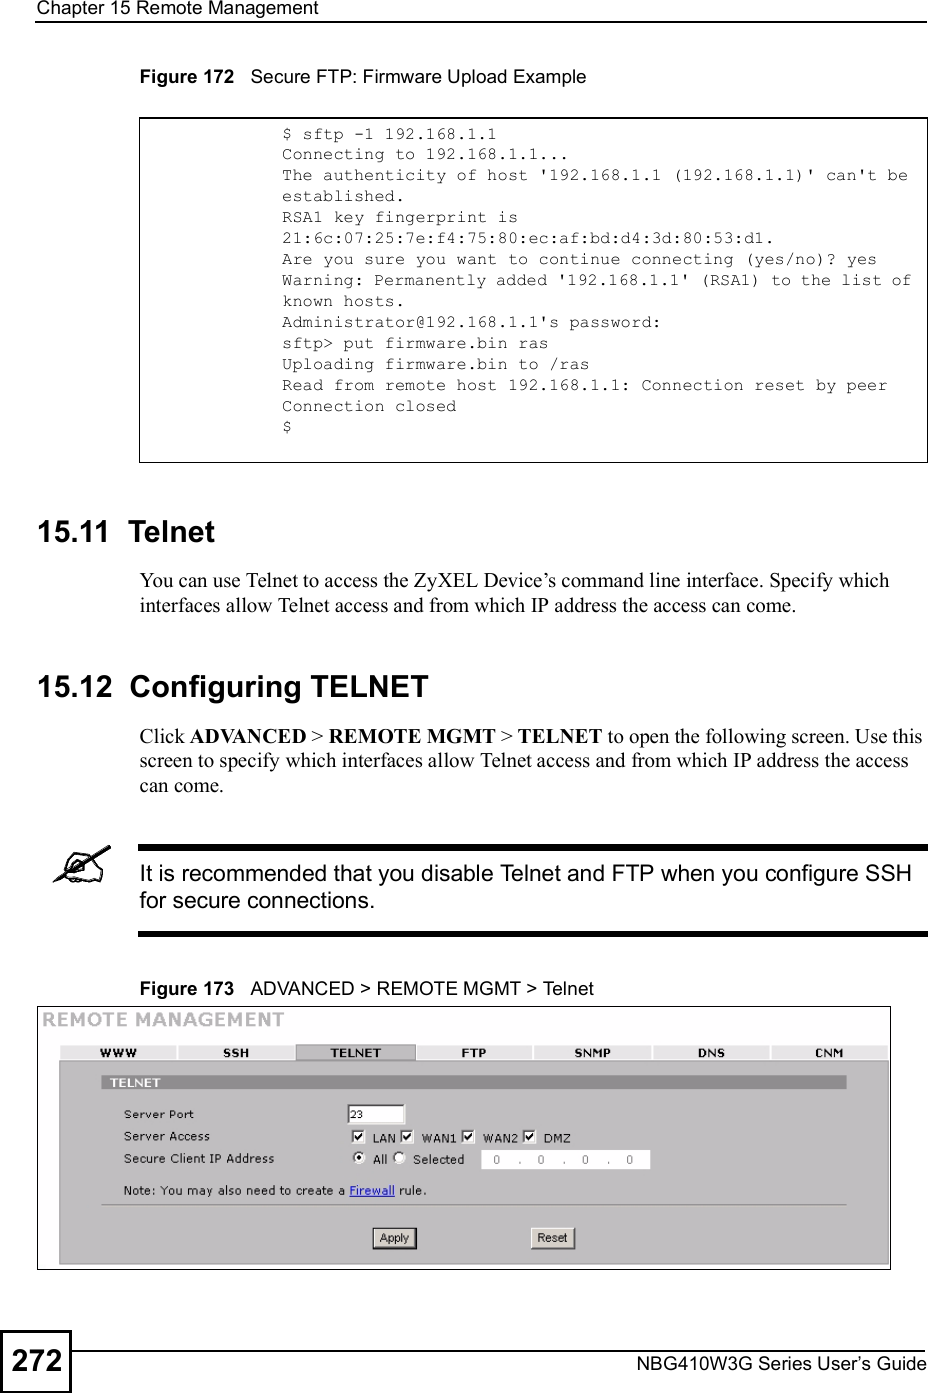 Chapter 15Remote ManagementNBG410W3G Series User s Guide272Figure 172   Secure FTP: Firmware Upload Example15.11  Telnet You can use Telnet to access the ZyXEL Device!s command line interface. Specify which interfaces allow Telnet access and from which IP address the access can come.15.12  Configuring TELNETClick ADVANCED &gt; REMOTE MGMT &gt; TELNET to open the following screen. Use this screen to specify which interfaces allow Telnet access and from which IP address the access can come.It is recommended that you disable Telnet and FTP when you configure SSH for secure connections.Figure 173   ADVANCED &gt; REMOTE MGMT &gt; Telnet$ sftp -1 192.168.1.1Connecting to 192.168.1.1...The authenticity of host &apos;192.168.1.1 (192.168.1.1)&apos; can&apos;t be established.RSA1 key fingerprint is 21:6c:07:25:7e:f4:75:80:ec:af:bd:d4:3d:80:53:d1.Are you sure you want to continue connecting (yes/no)? yesWarning: Permanently added &apos;192.168.1.1&apos; (RSA1) to the list of known hosts.Administrator@192.168.1.1&apos;s password:sftp&gt; put firmware.bin rasUploading firmware.bin to /rasRead from remote host 192.168.1.1: Connection reset by peerConnection closed$